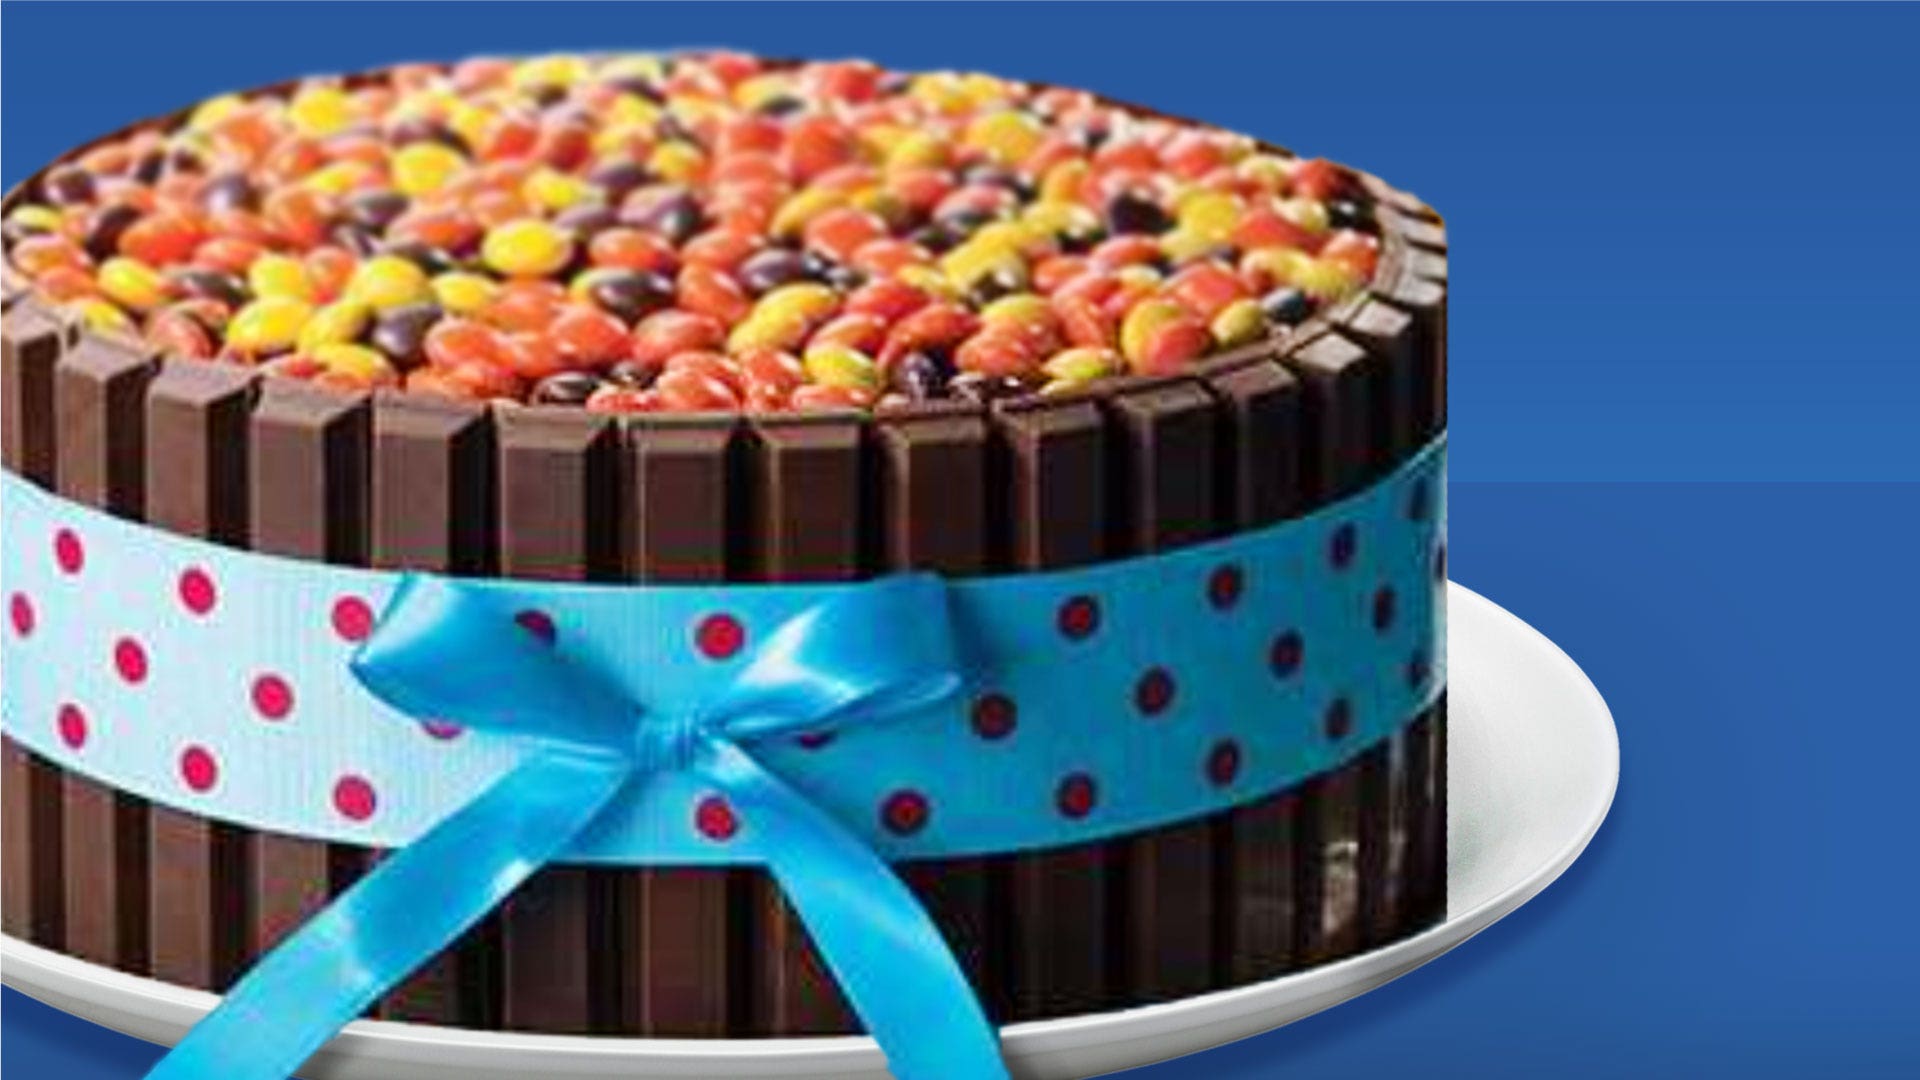 Cake mania - Cake with chocolate 450g | 3800093500671| Department products  at Moldova Retail Stores.